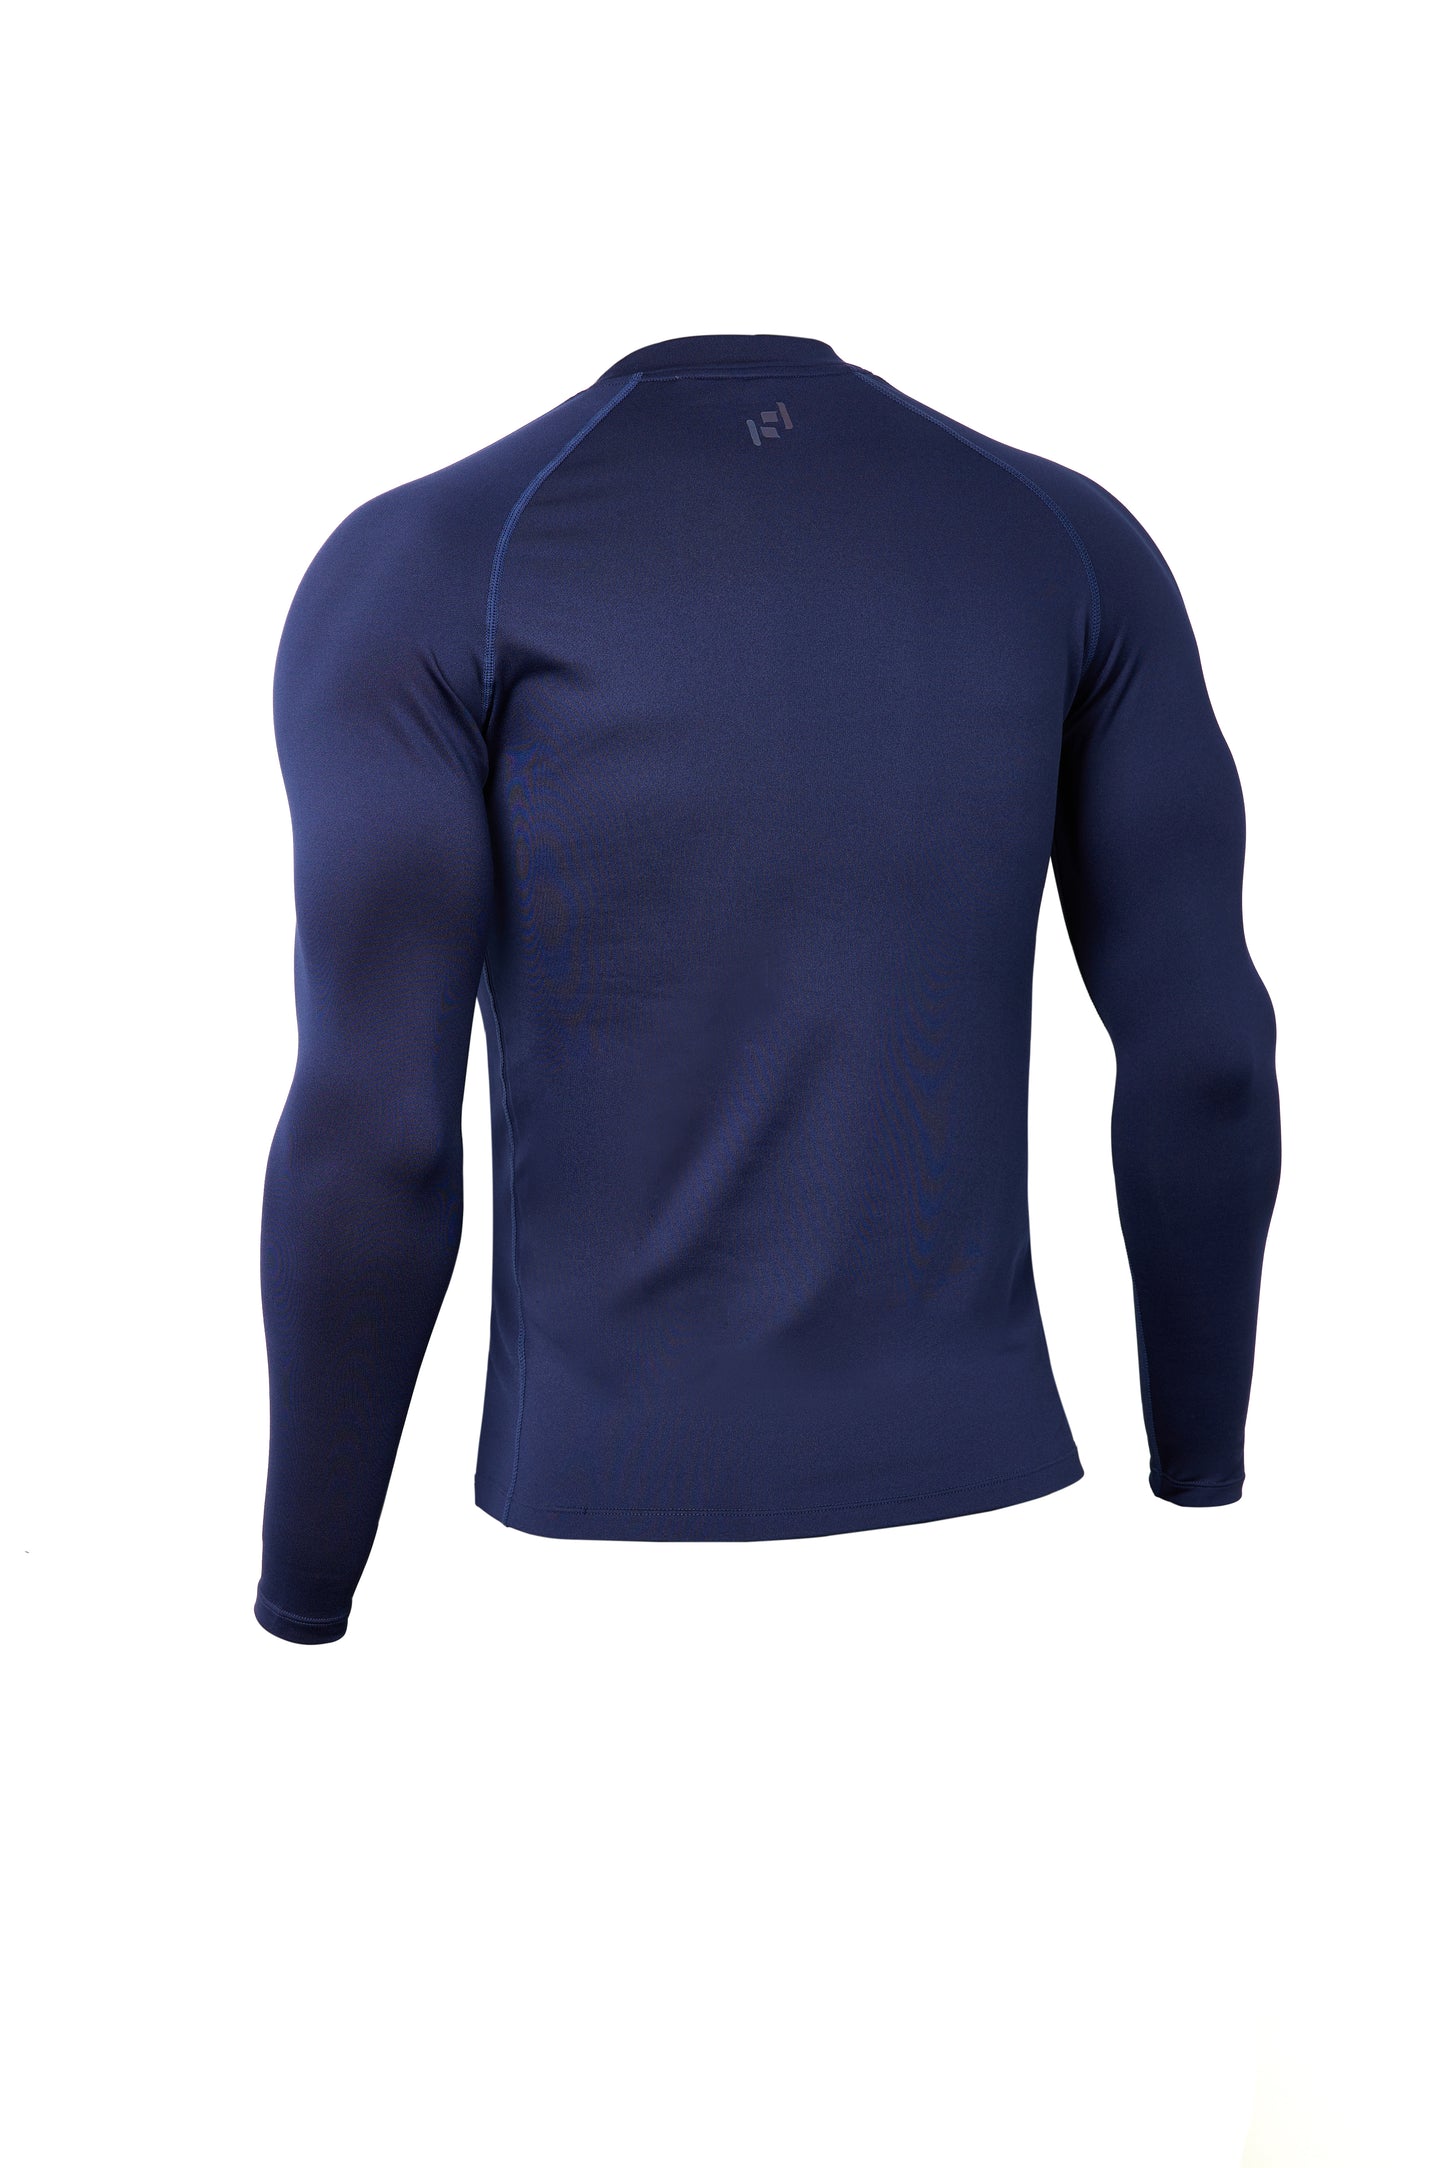 Essential Thermal Base Layer Shirts Navy